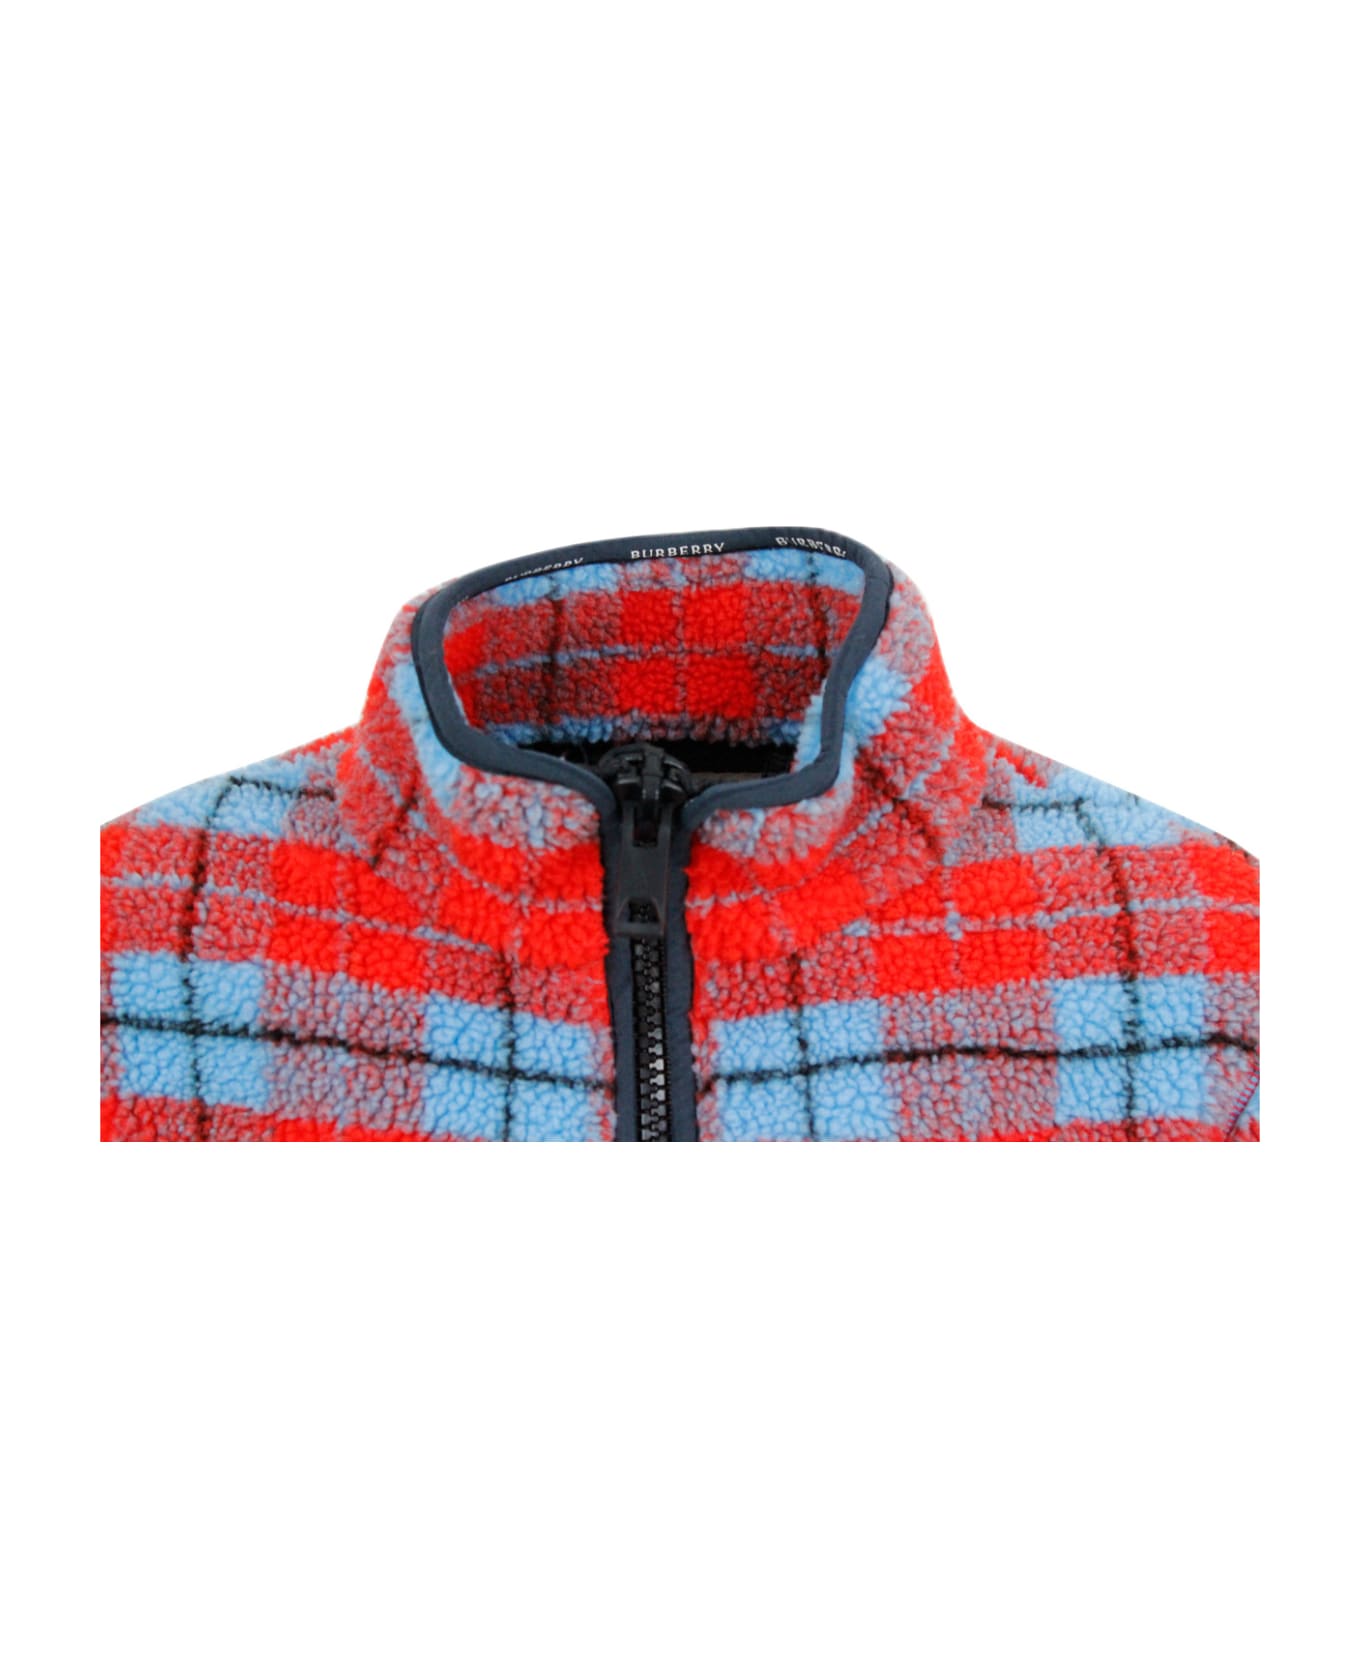 Burberry Jacket Made Of Cotton Fleece With Tartan Motif In Bright Colors And Half Zip Closure - Red コート＆ジャケット